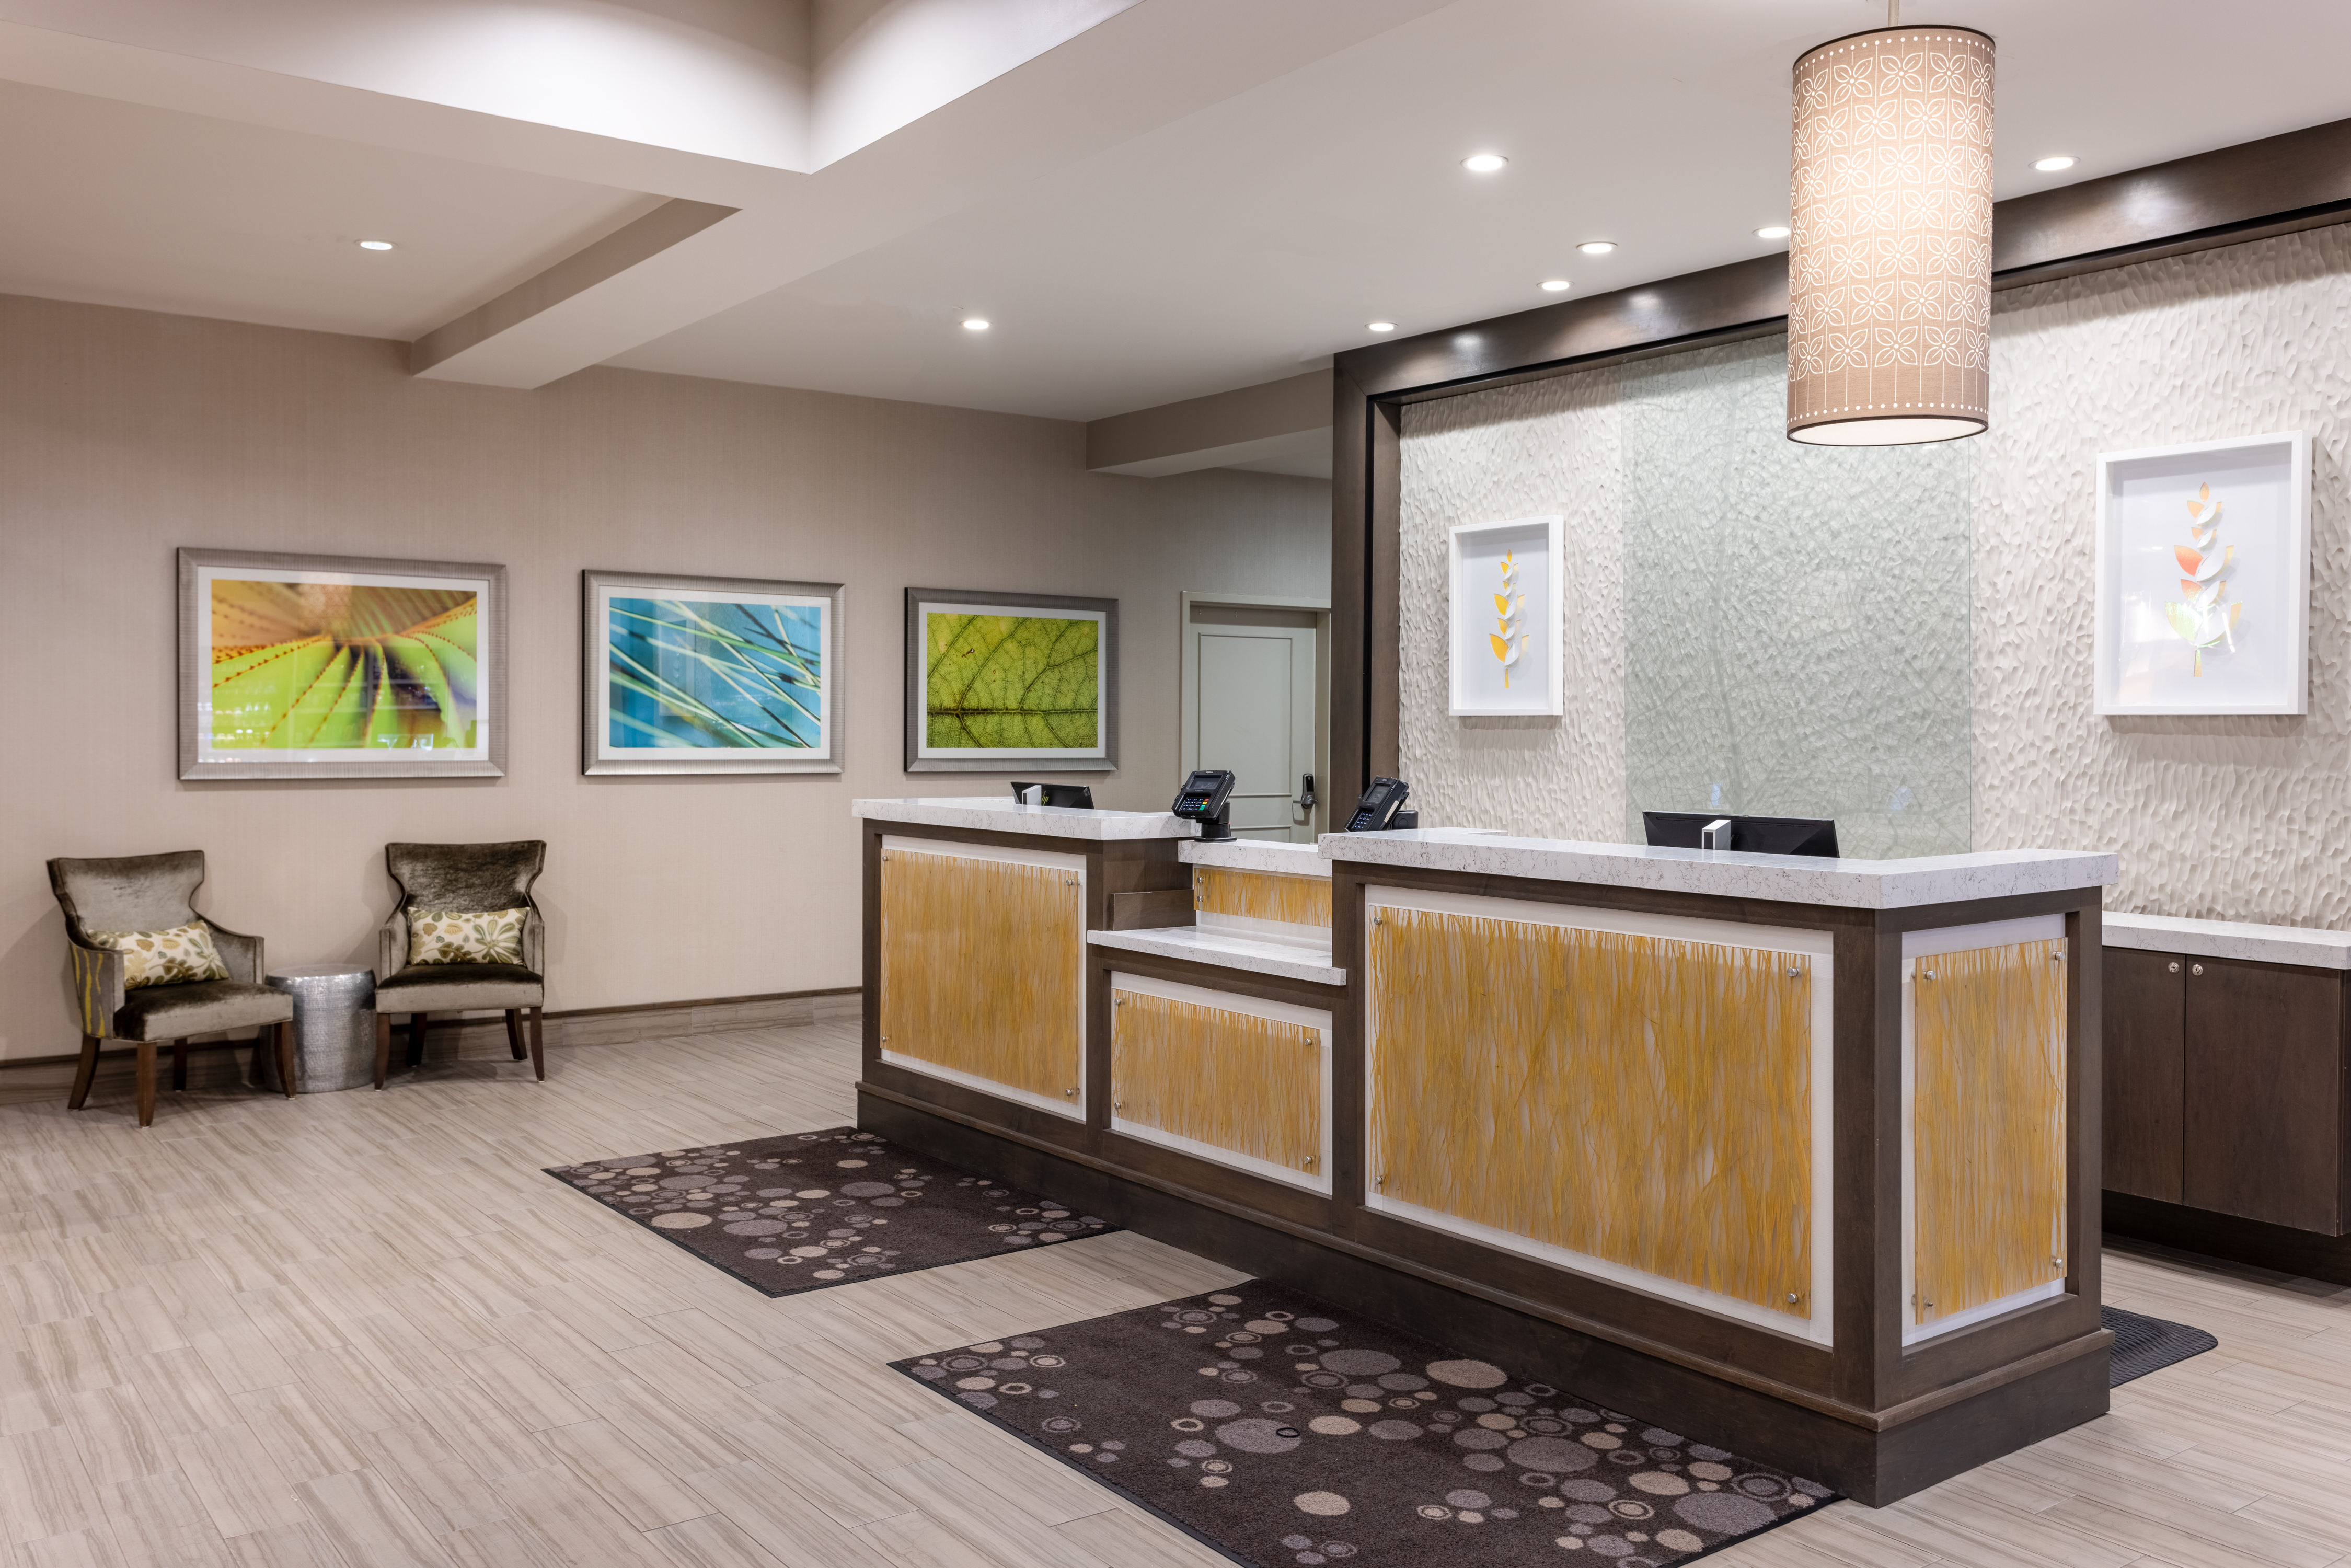 Welcome to the Hilton Garden Inn Pittsfield